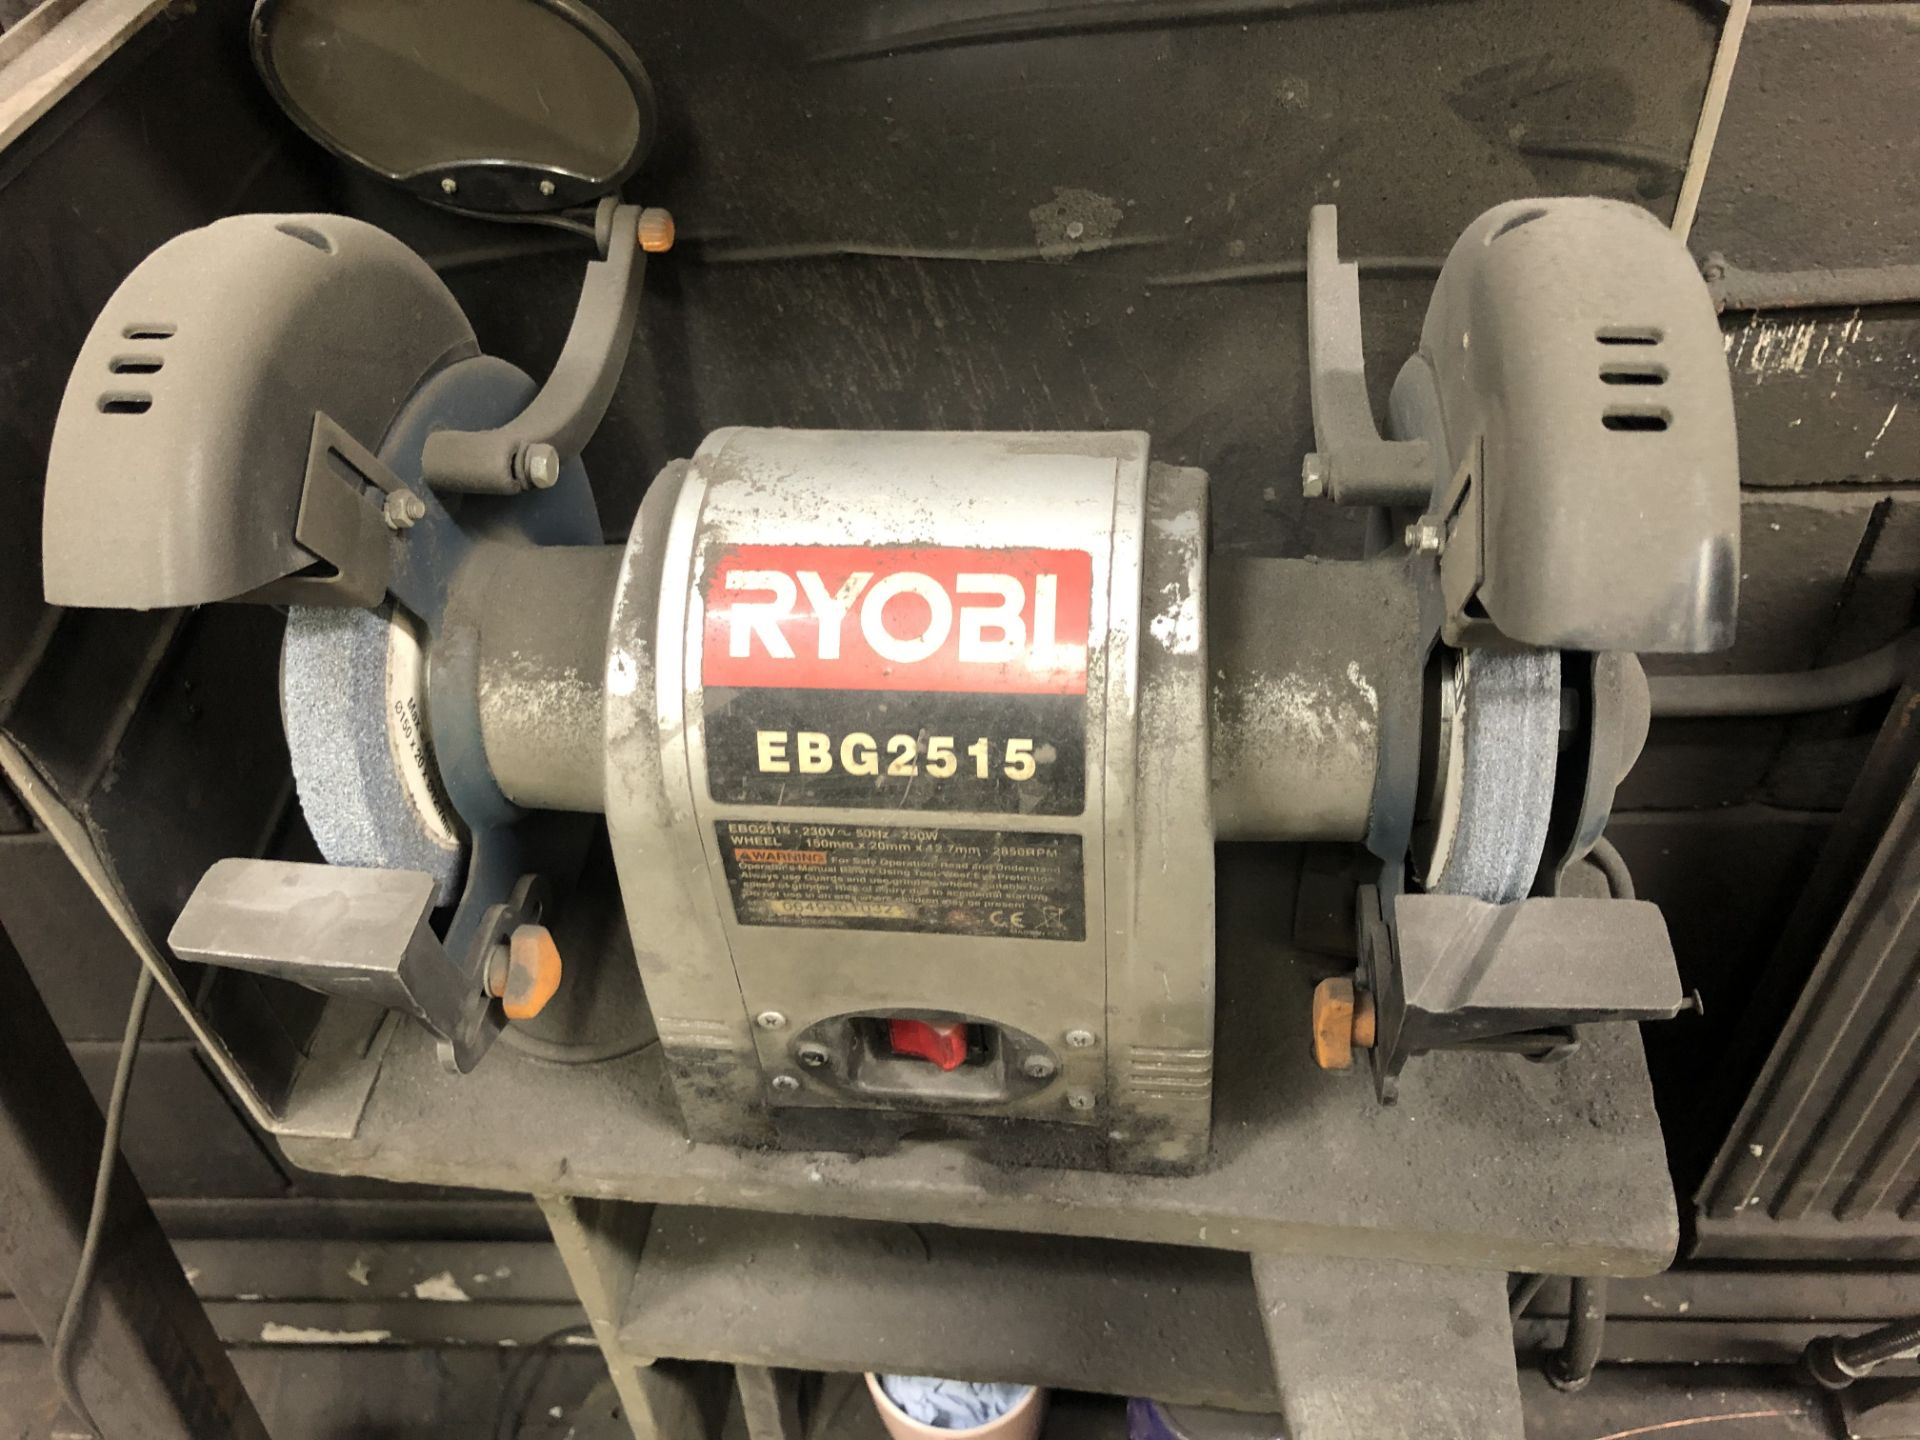 Ryobi EBG2515 Double Ended Bench Grinder, 240V, with stand - Image 2 of 3